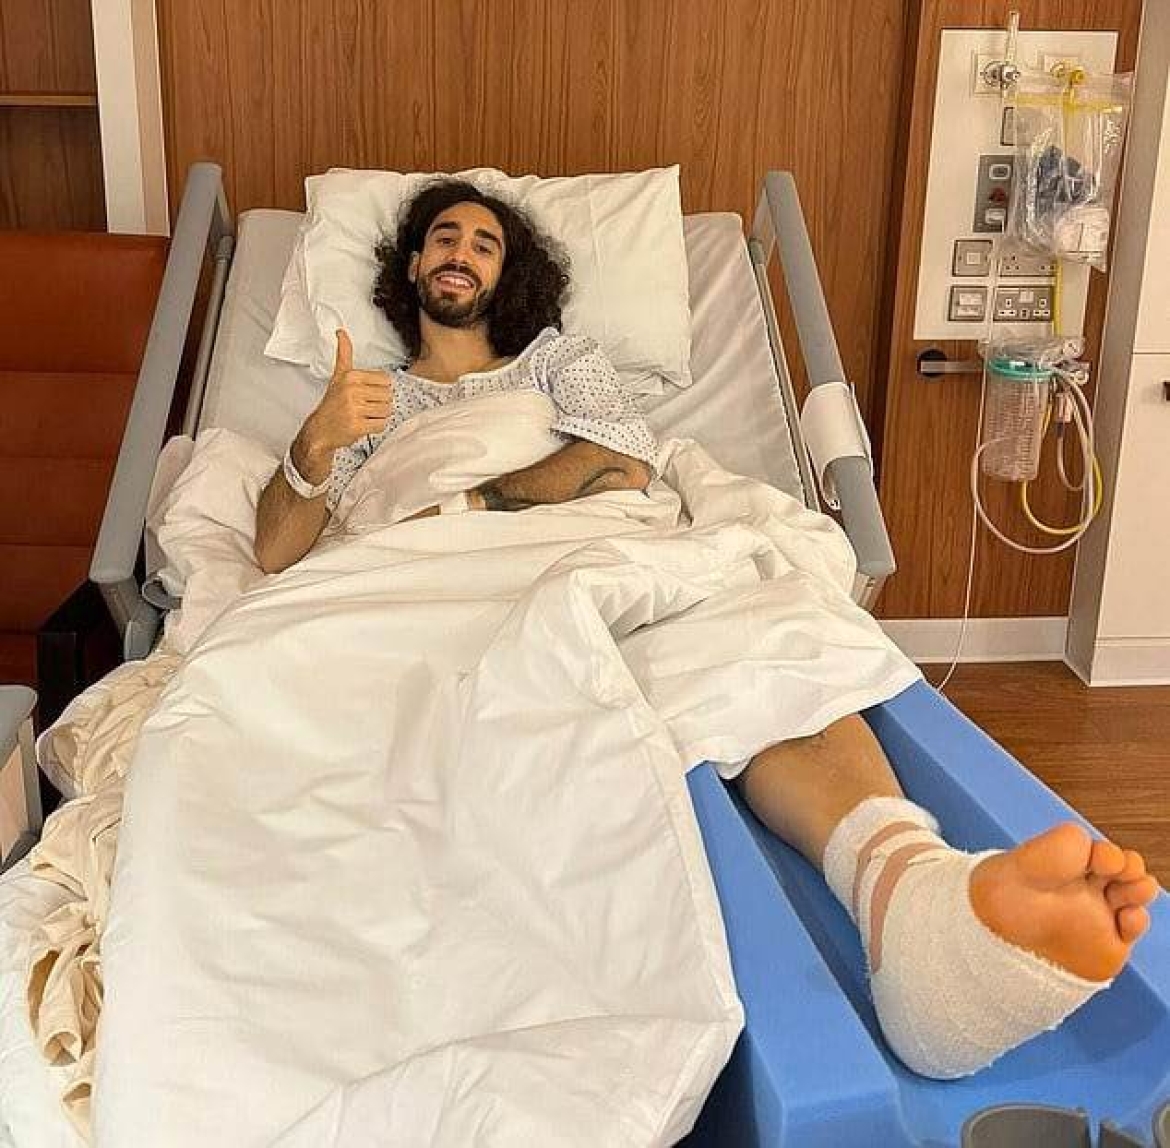 ALL YOU NEEDS TO KNOW ABOUT MARC CUCURELLA’S INJURY AND IS RECOVERY DAY